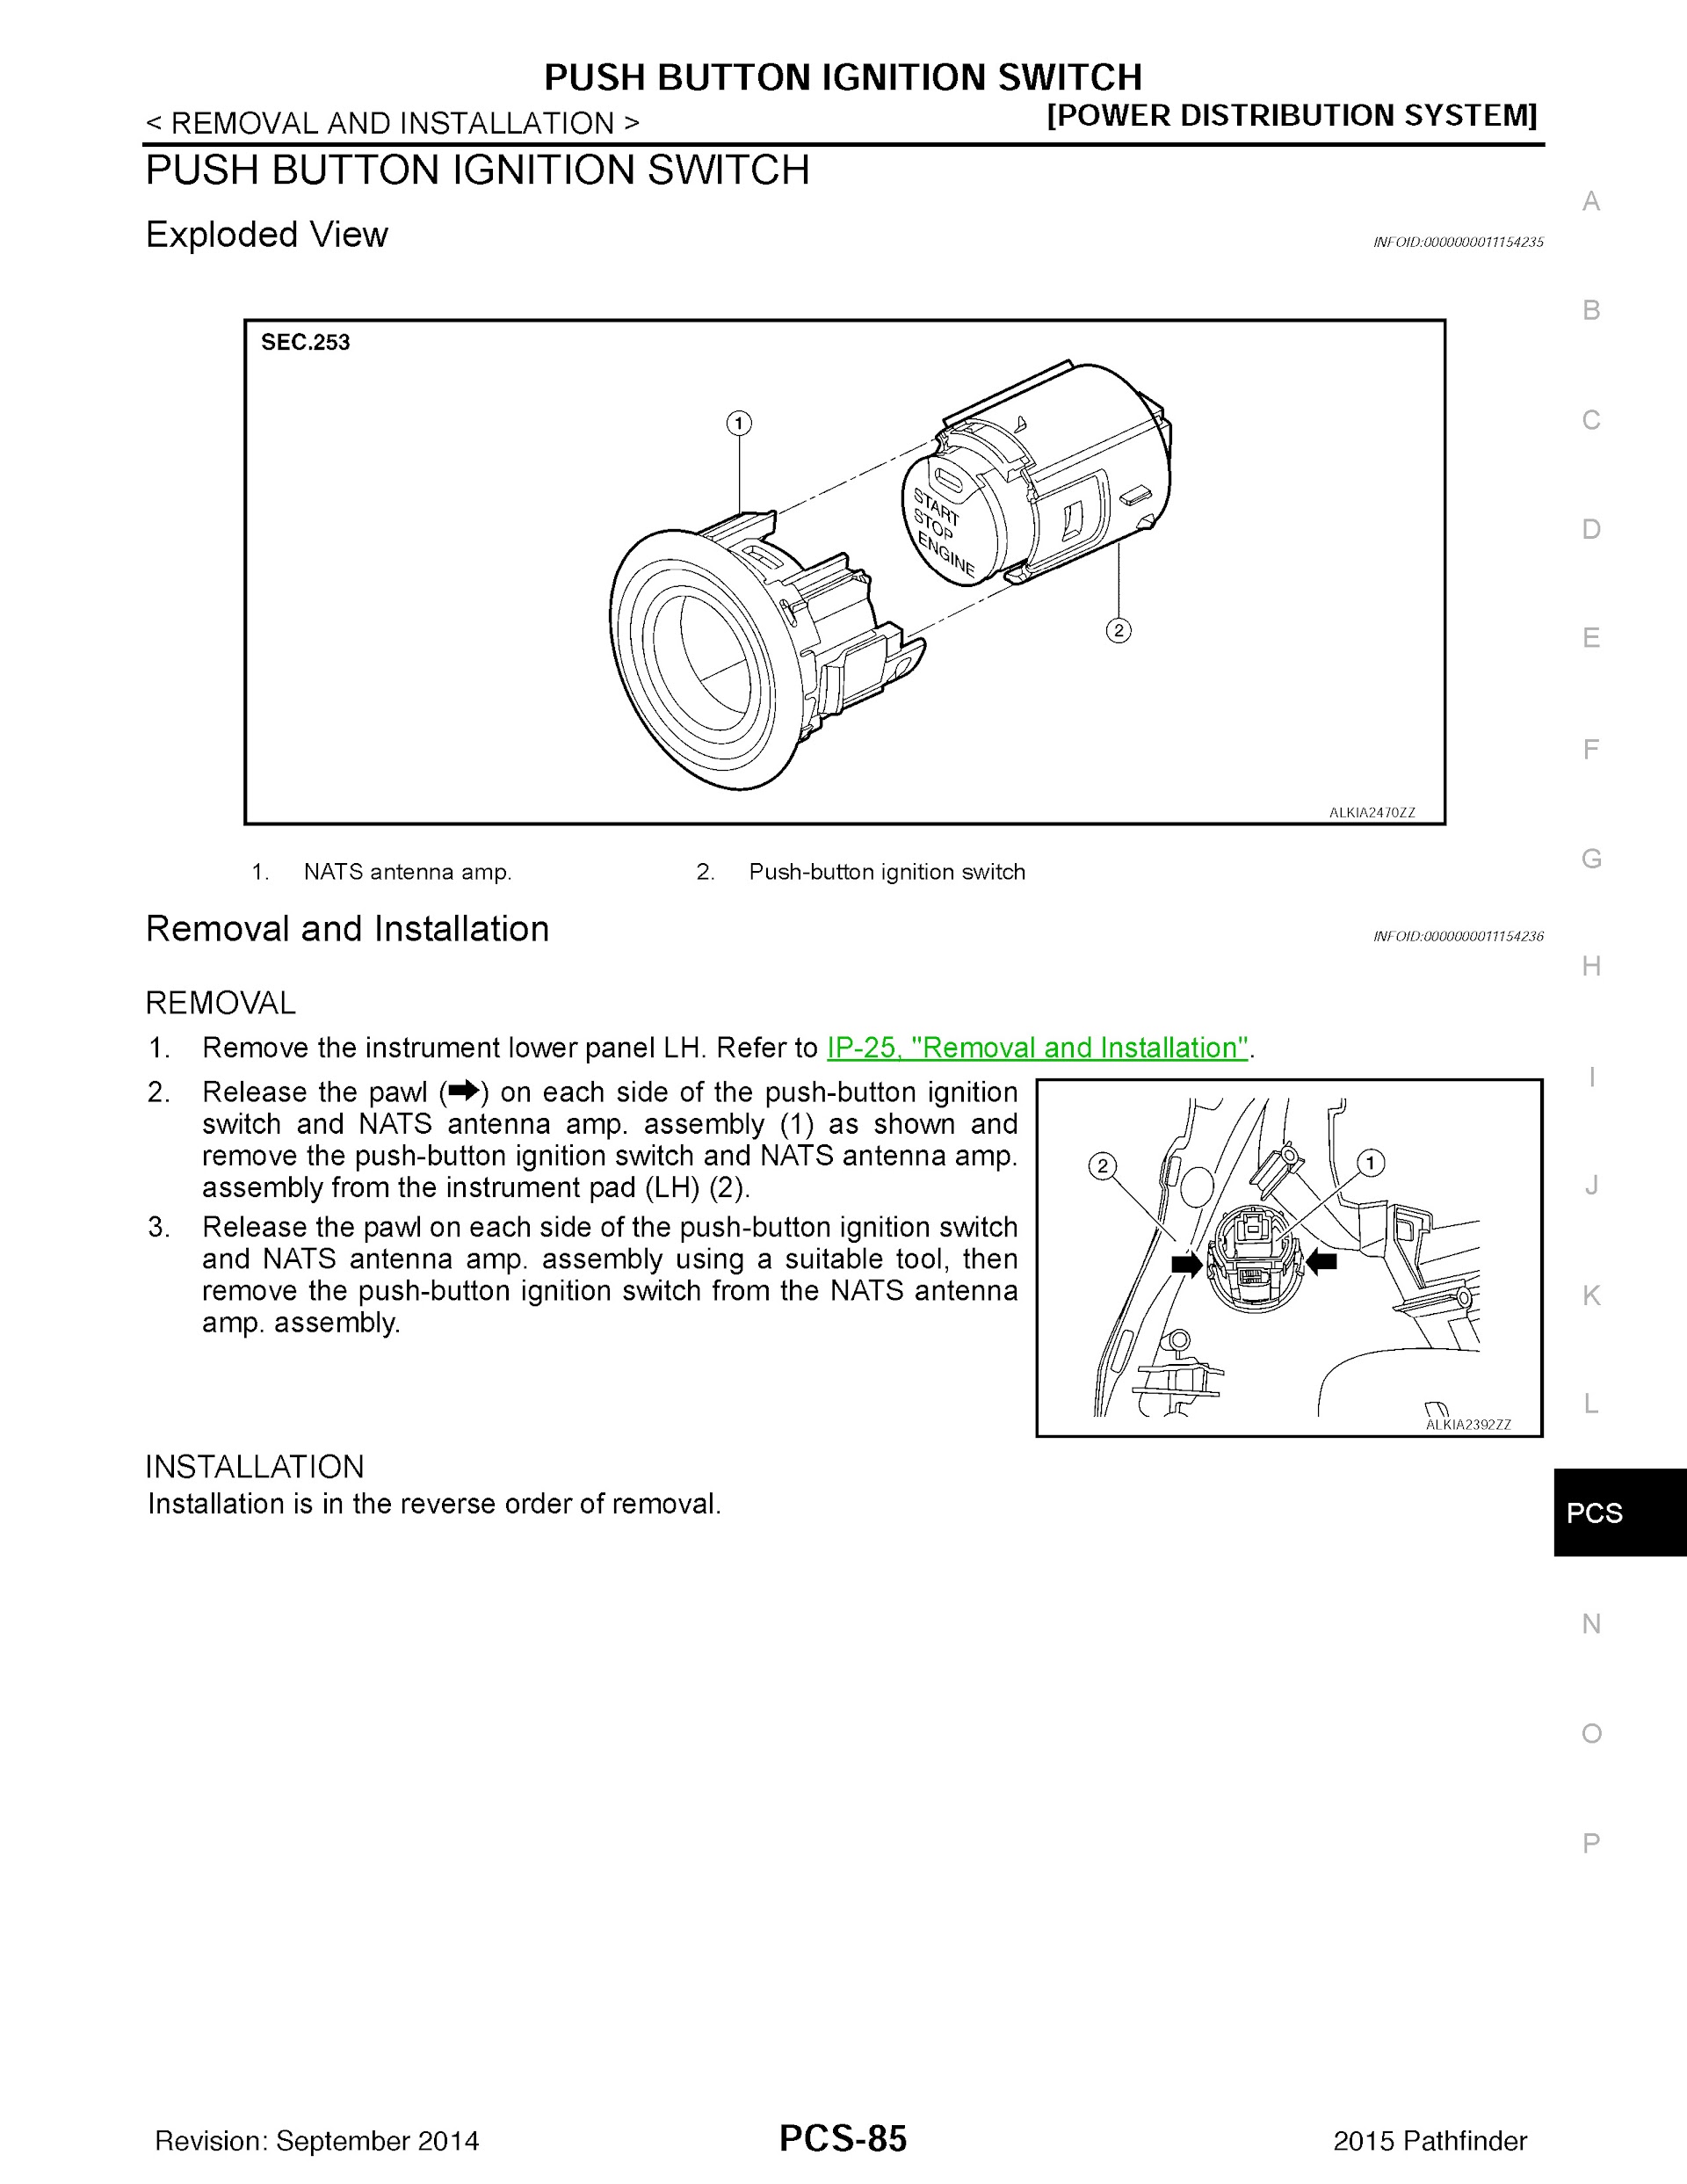 2015 Nissan Pathfinder Repair Manual, Push Button Ignition Switch Removal and Installation